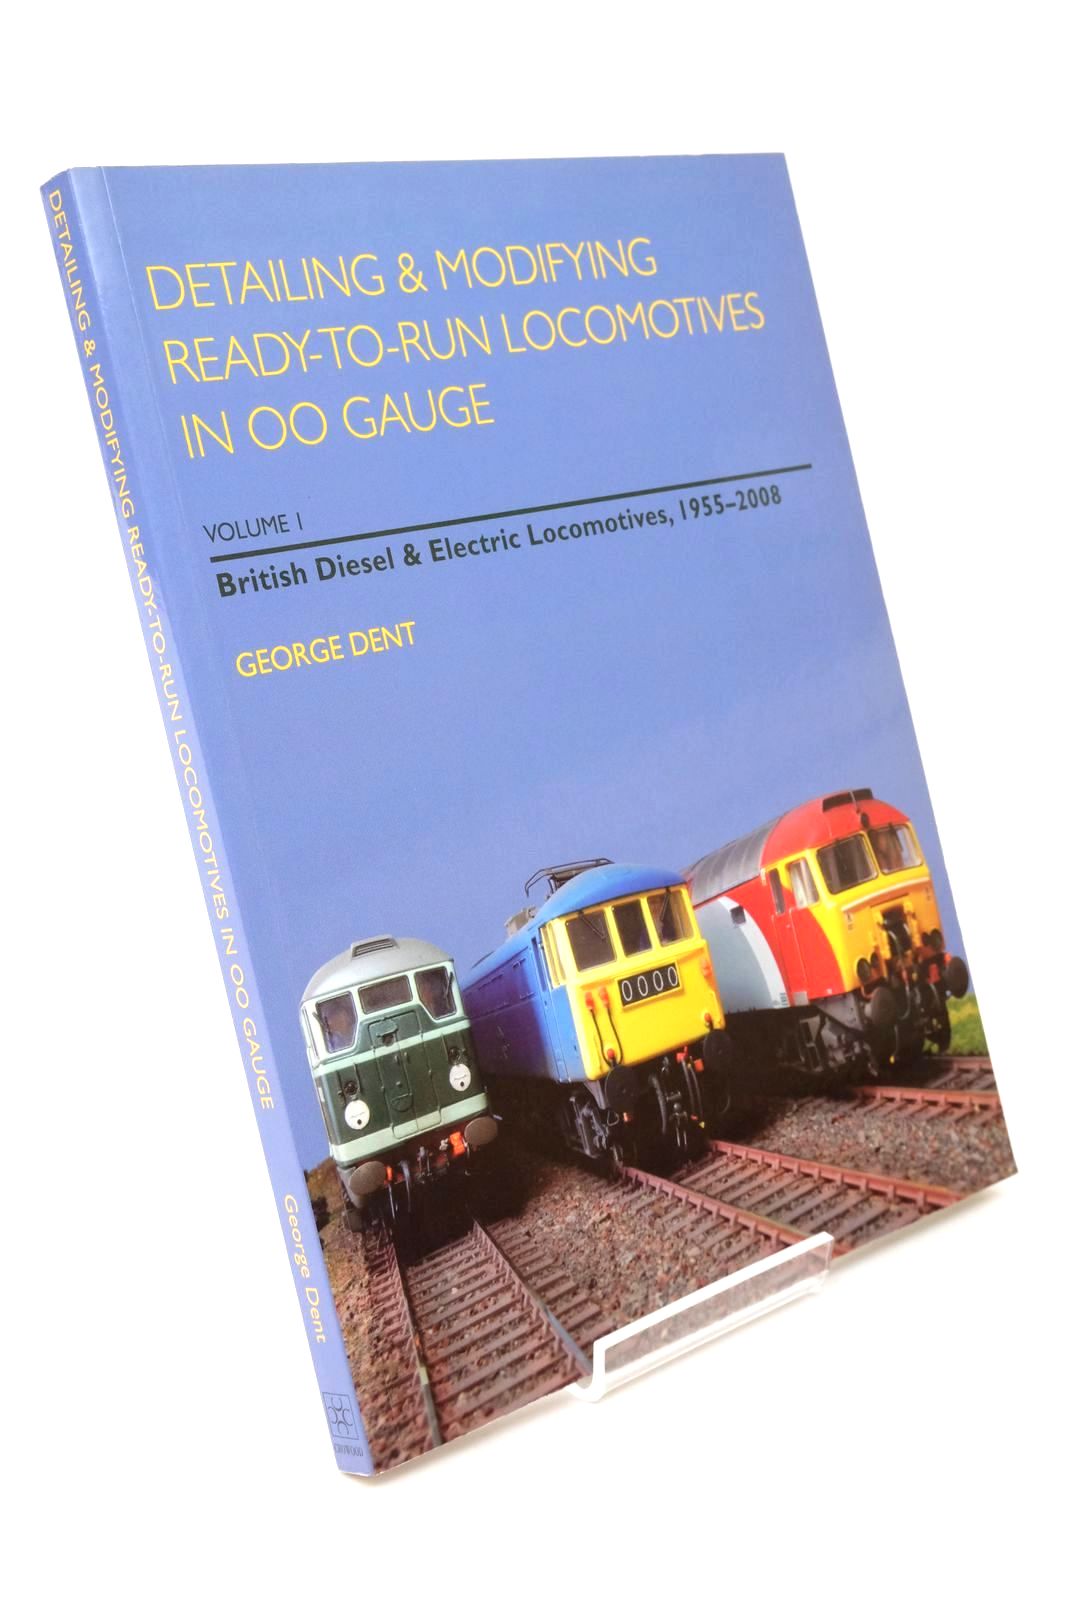 Photo of DETAILING AND MODIFYING READY-TO-RUN LOCOMOTIVES IN OO GAUGE VOLUME 1 written by Dent, George published by The Crowood Press (STOCK CODE: 1322522)  for sale by Stella & Rose's Books